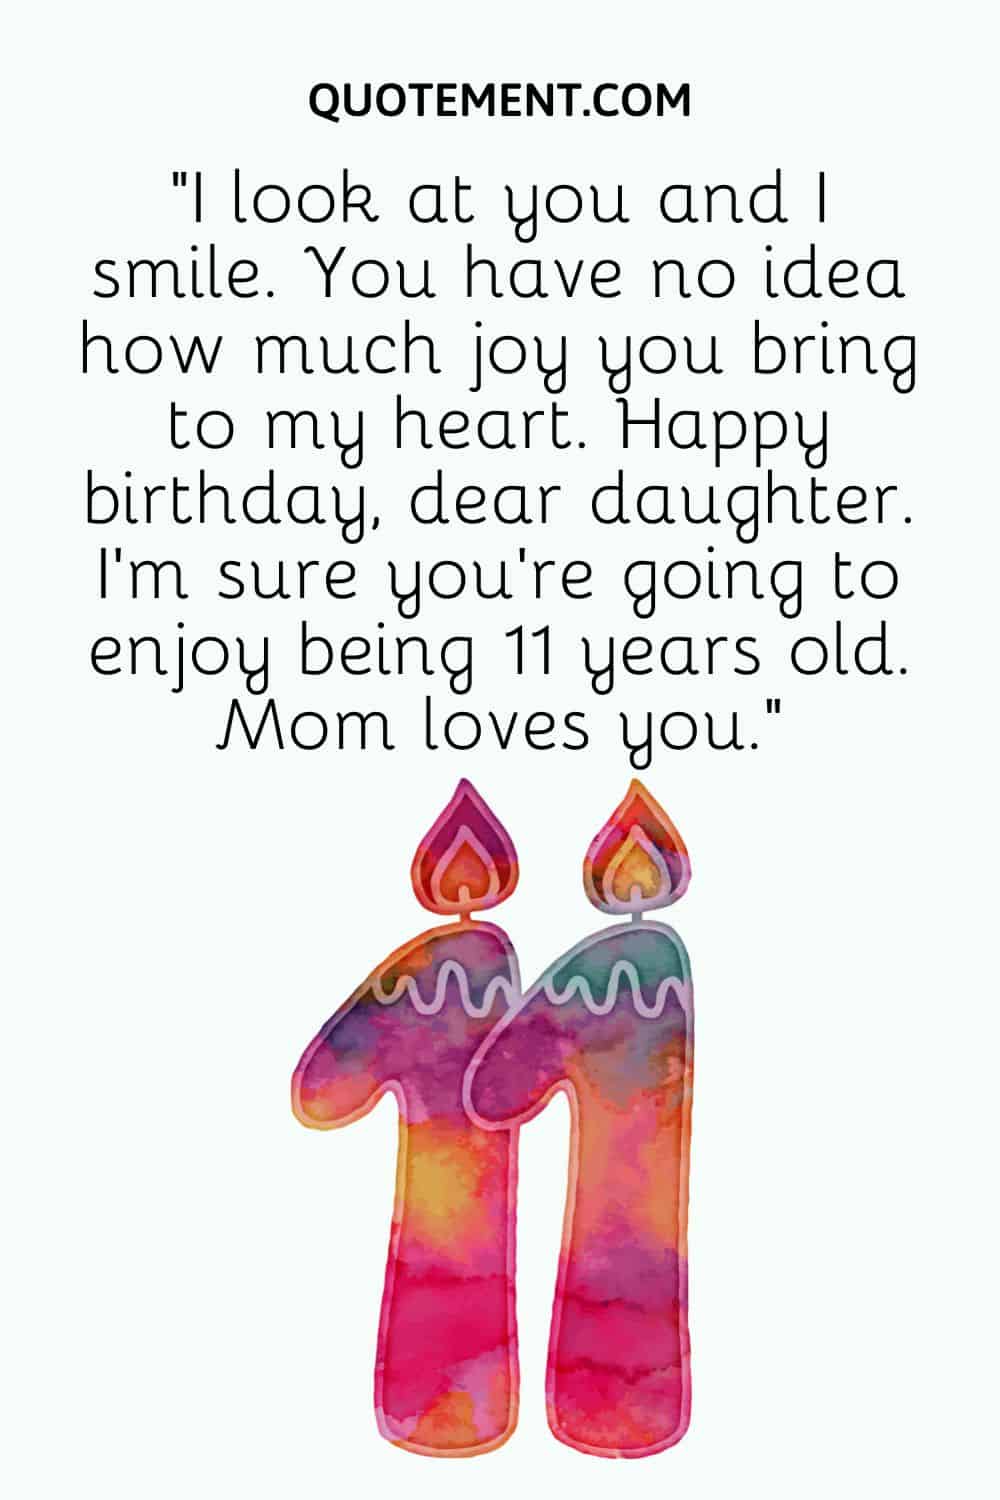 “I look at you and I smile. You have no idea how much joy you bring to my heart. Happy birthday, dear daughter. I’m sure you’re going to enjoy being 11 years old. Mom loves you.”